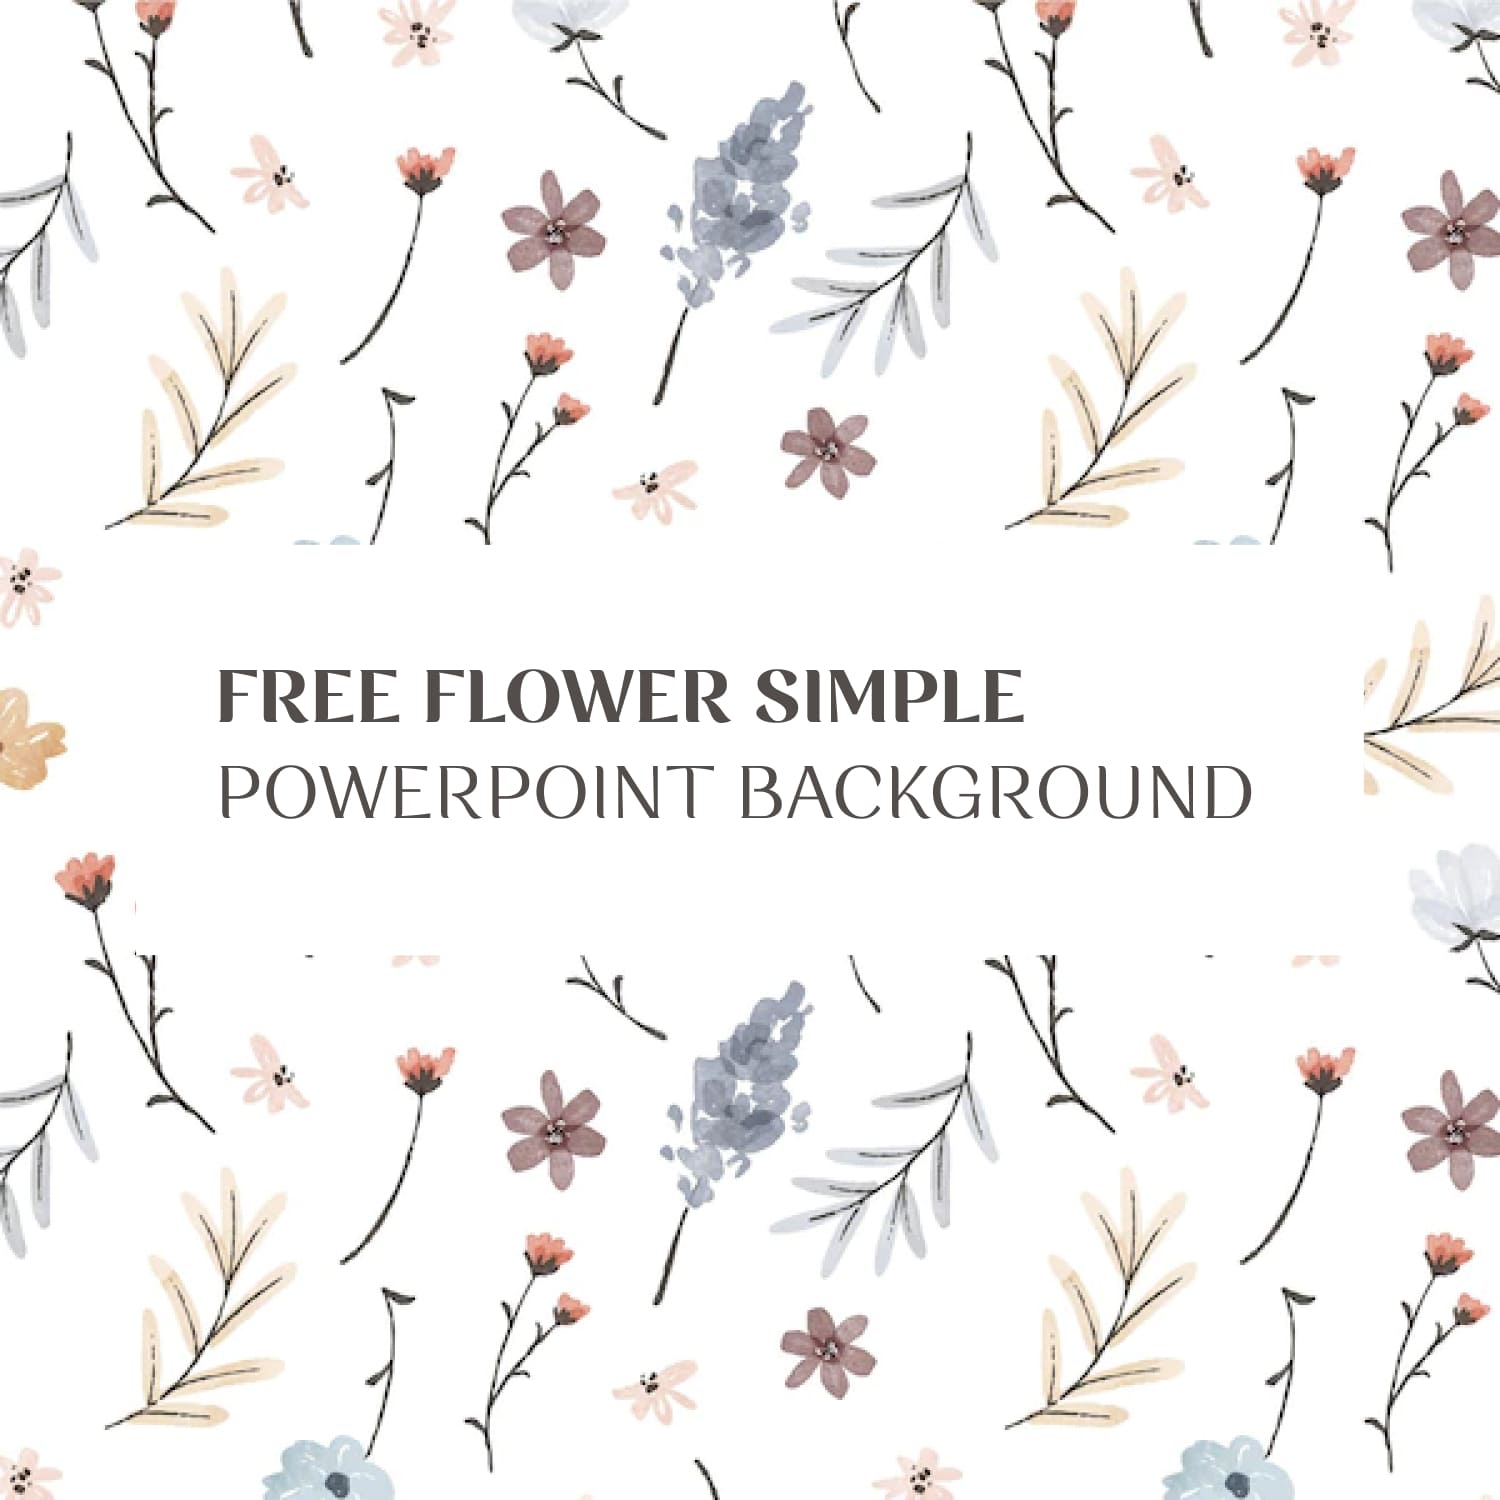 Free Flower Simple Powerpoint Background 1500x1500 2.